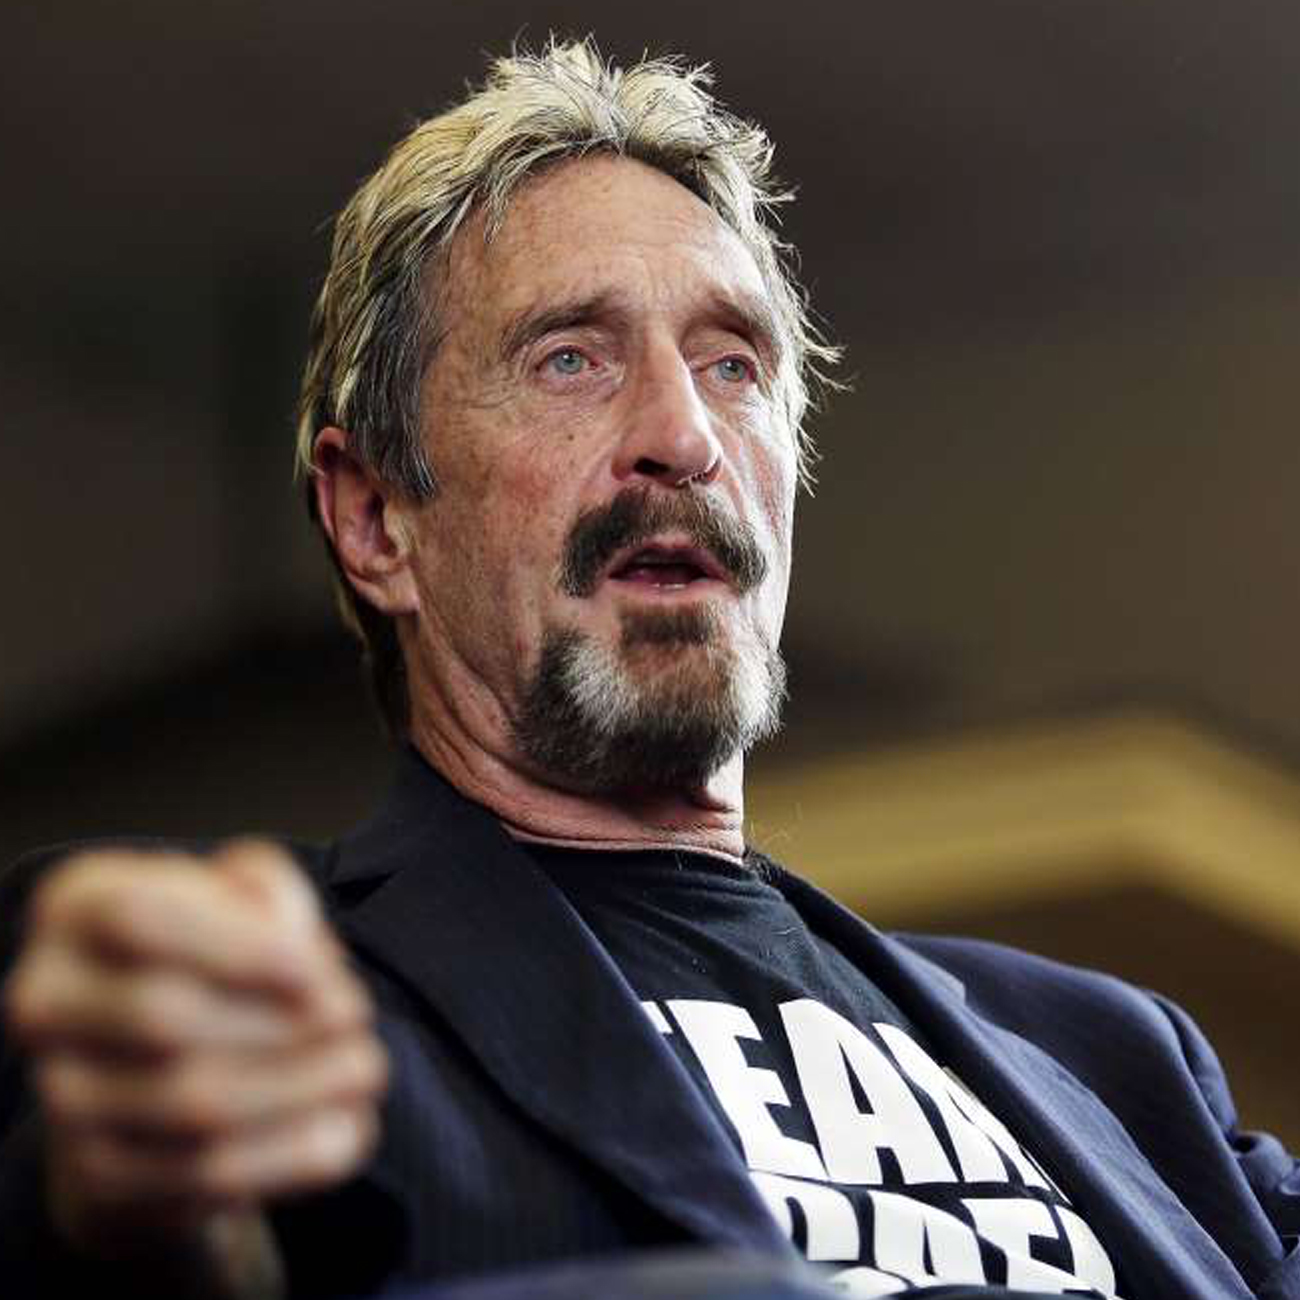 Presidential Candidate John McAfee Flees U.S. for Alleged Tax Fraud